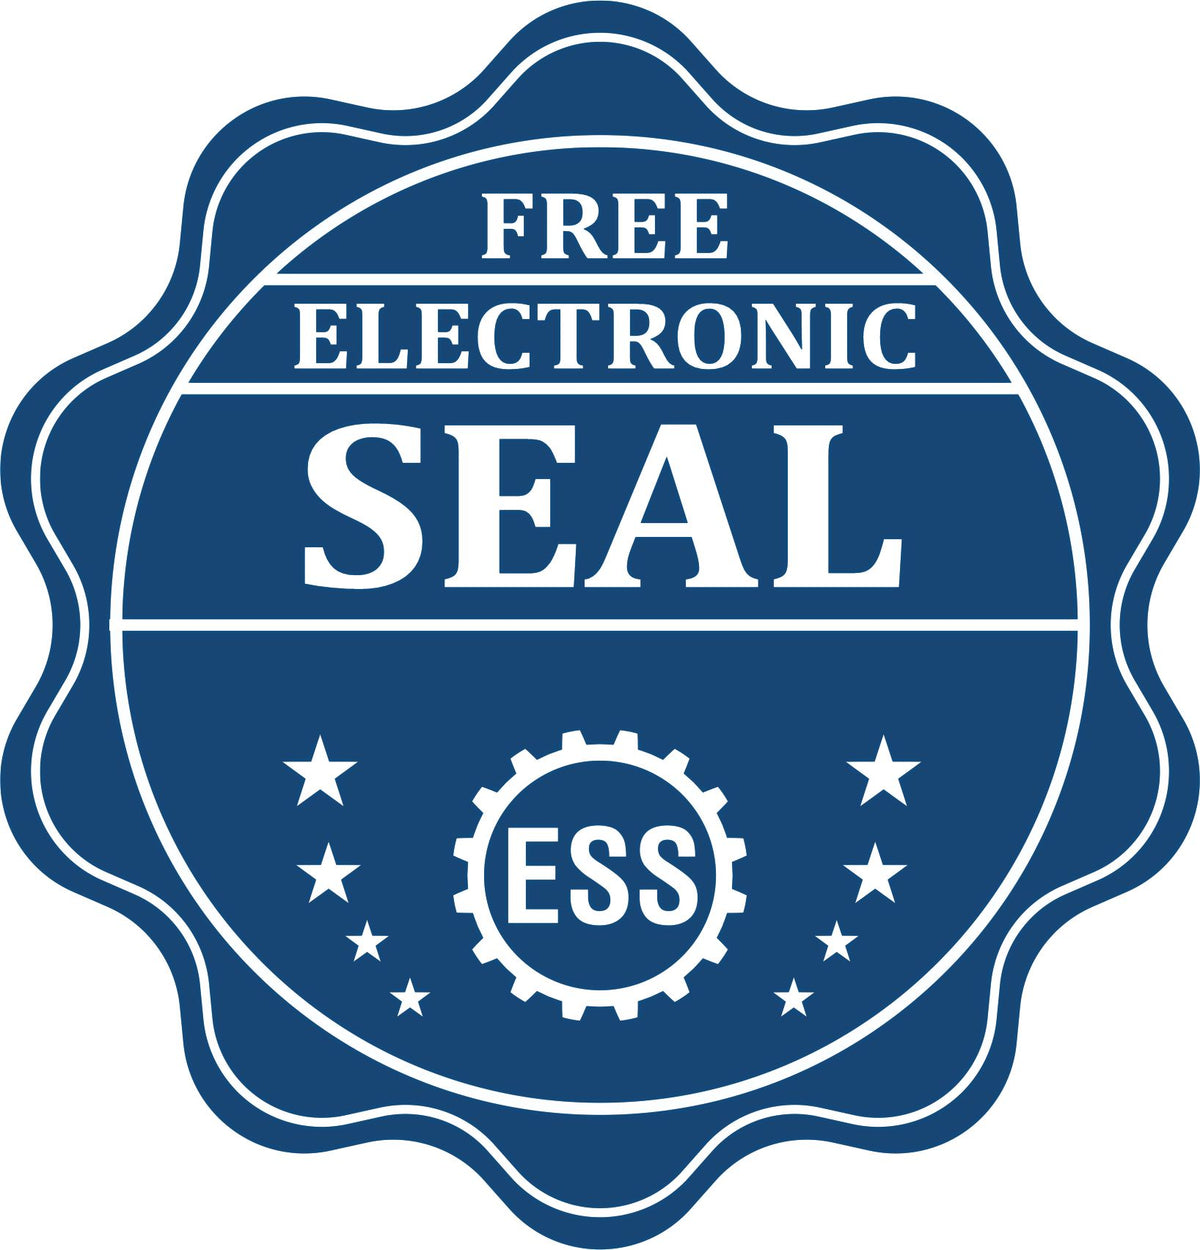 A badge showing a free electronic seal for the Hybrid Indiana Architect Seal with stars and the ESS gear on the emblem.